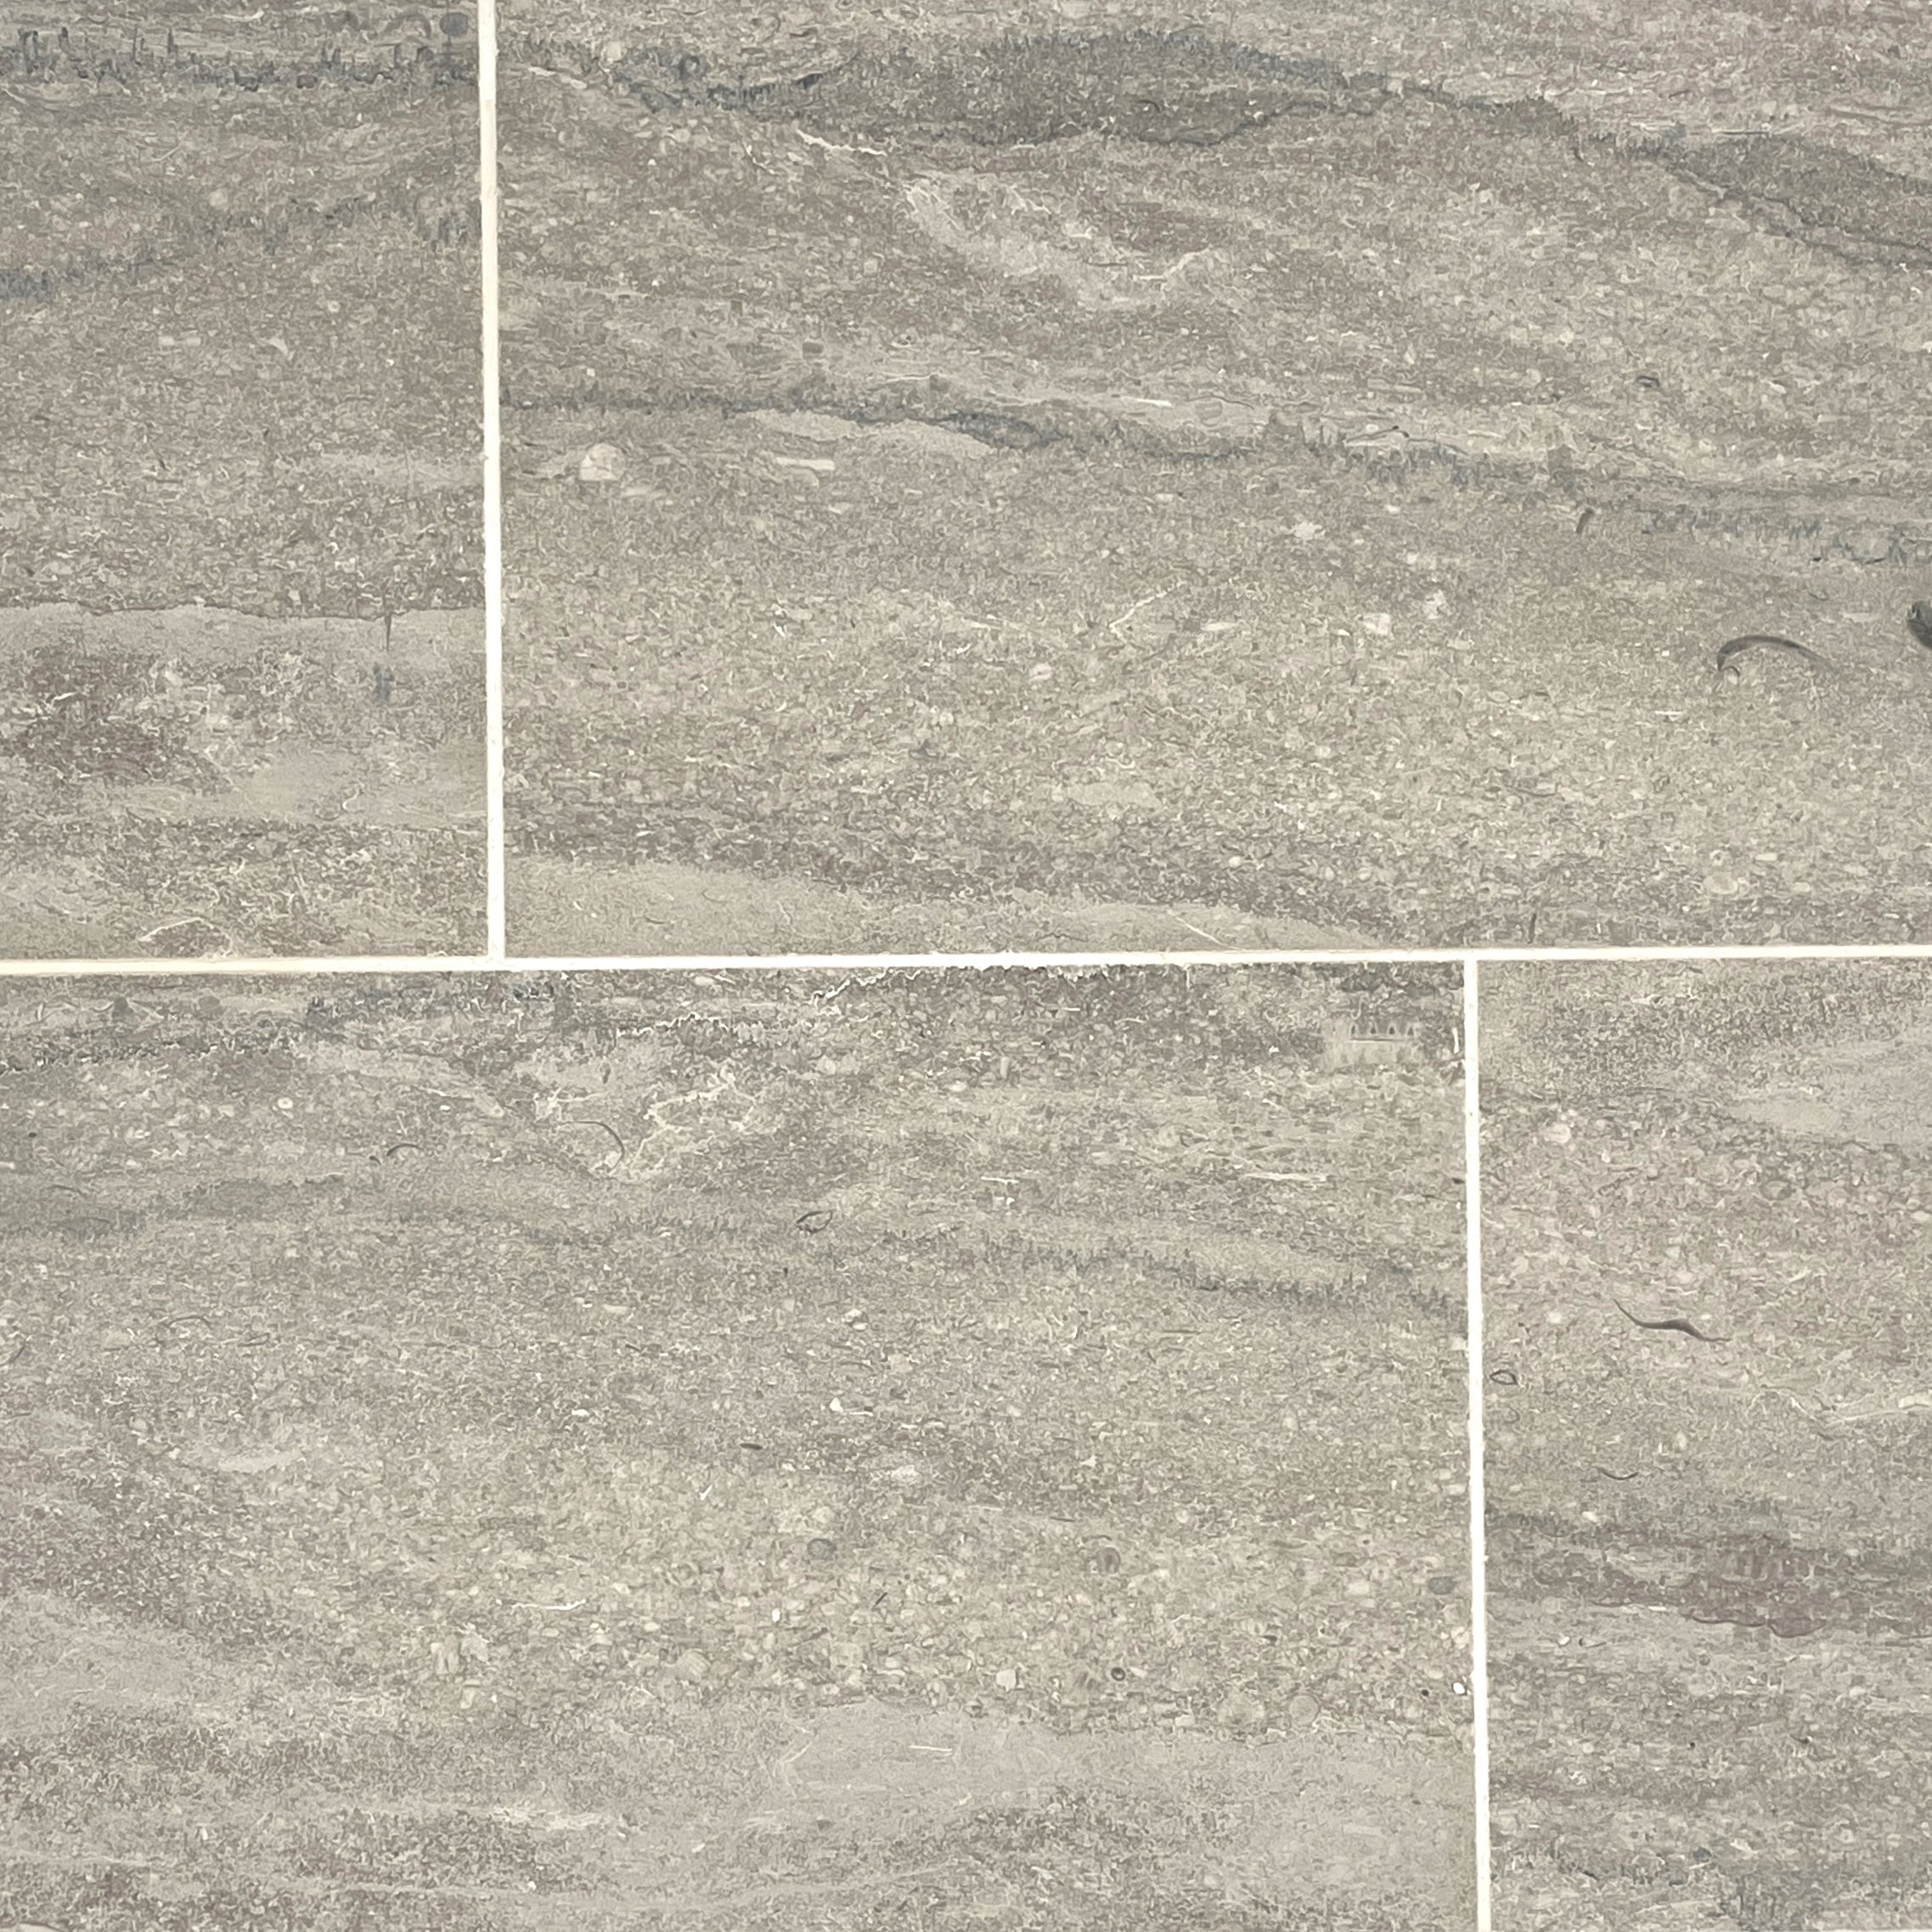 american limestone strata grey versailles pattern interior natural stone tile for floor and wall made in united states distributed by surface group international